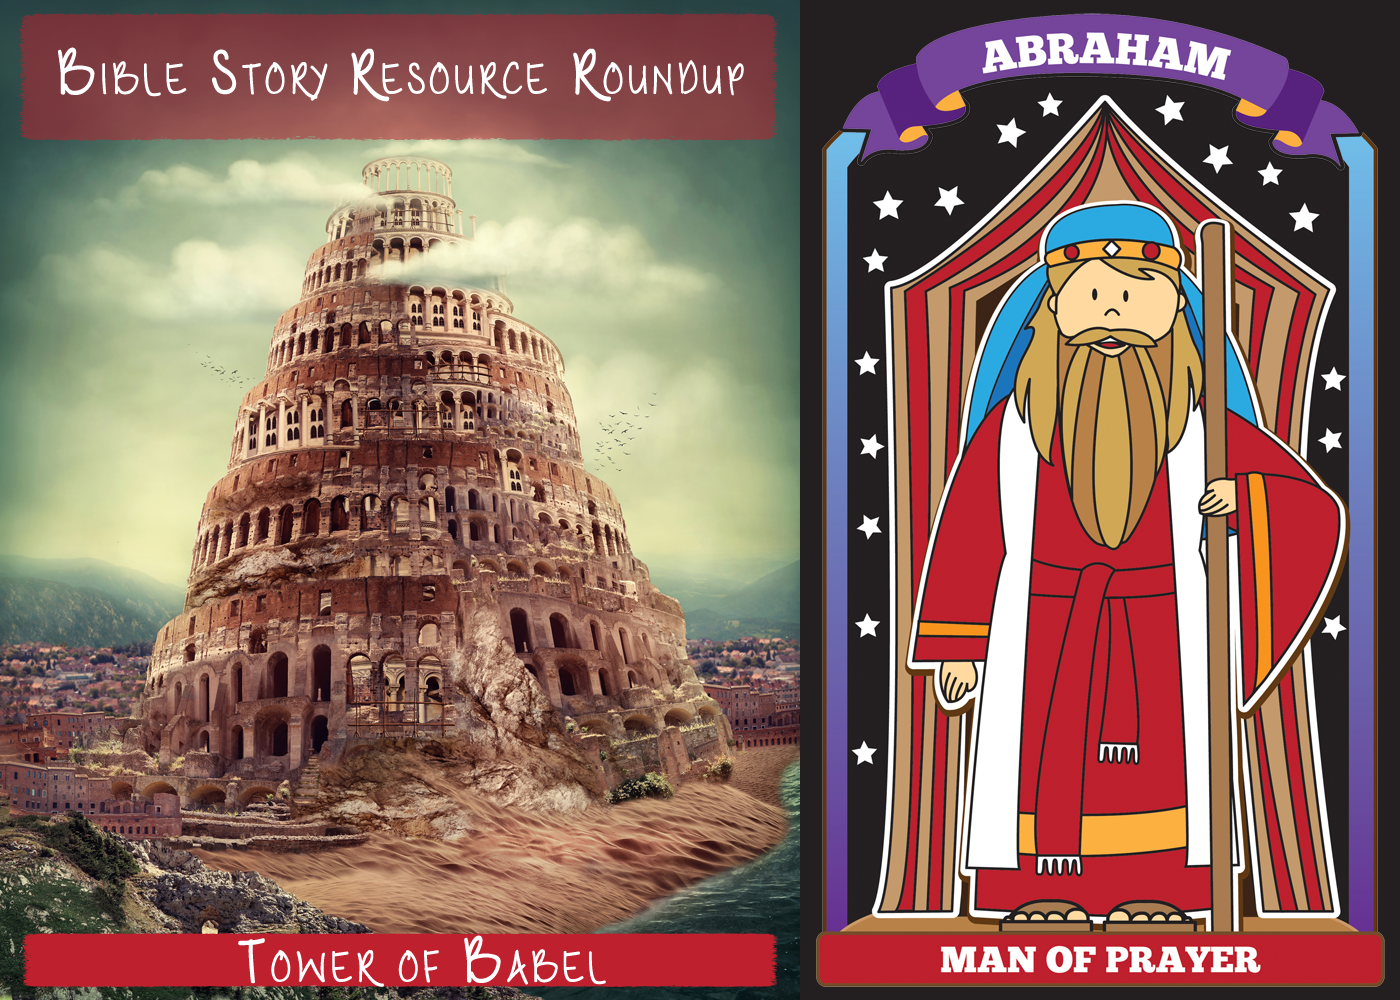 Bible Story Resource Roundup-Tower of Babel; Abraham